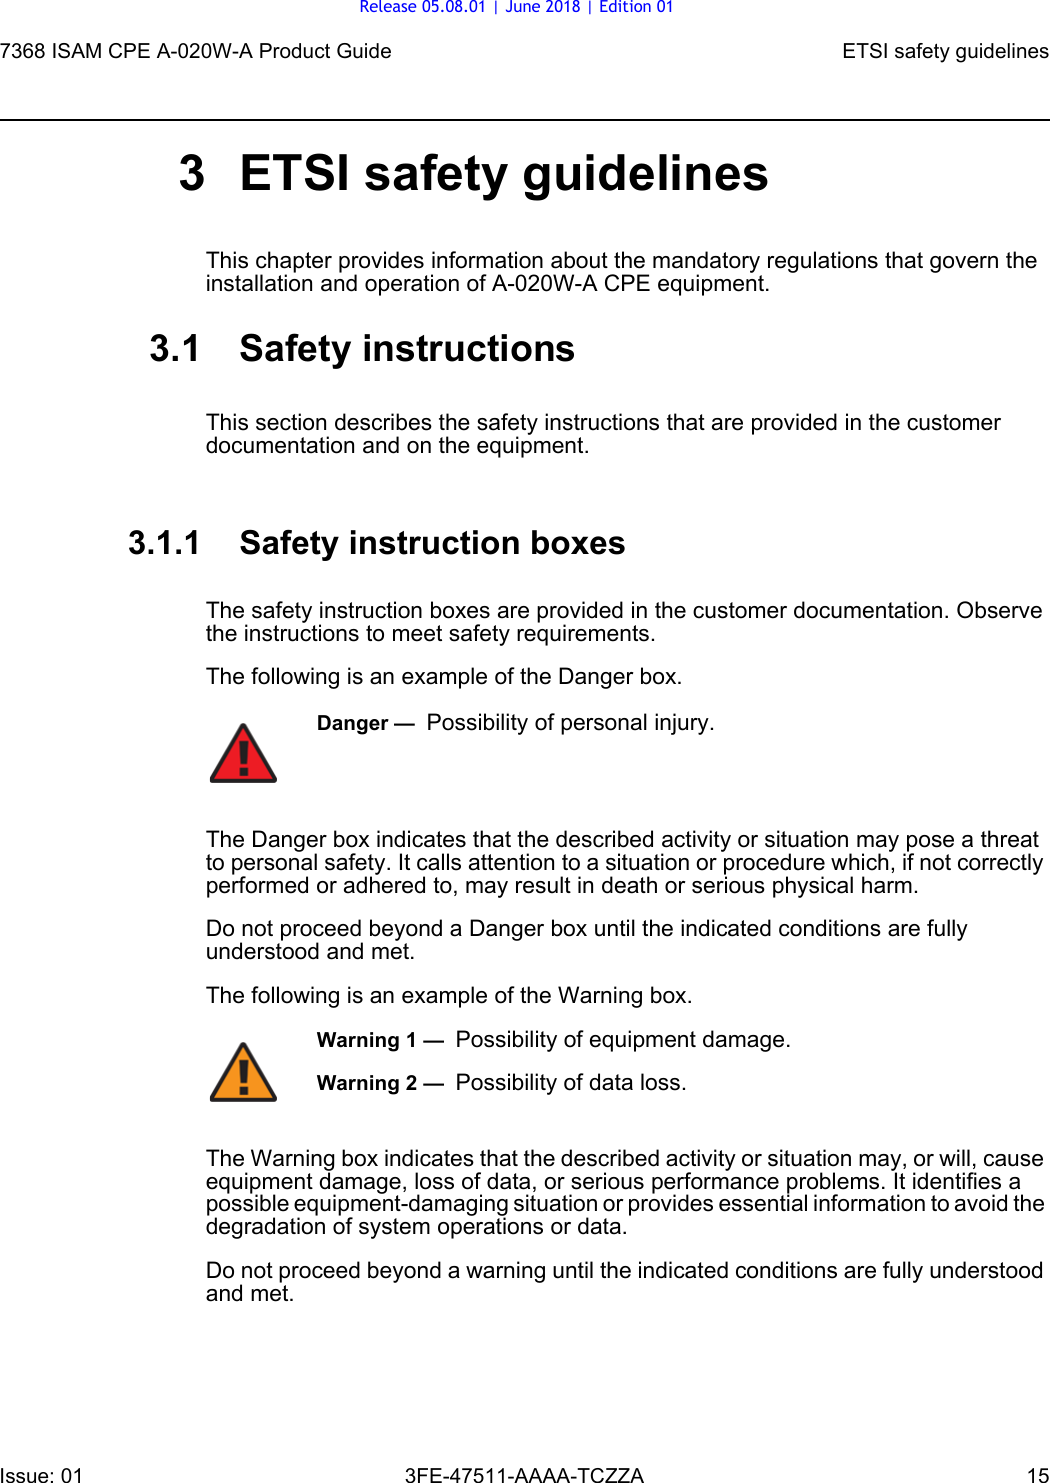 7368 ISAM CPE A-020W-A Product Guide ETSI safety guidelinesIssue: 01 3FE-47511-AAAA-TCZZA 15 3 ETSI safety guidelinesThis chapter provides information about the mandatory regulations that govern the installation and operation of A-020W-A CPE equipment.3.1 Safety instructionsThis section describes the safety instructions that are provided in the customer documentation and on the equipment.3.1.1 Safety instruction boxesThe safety instruction boxes are provided in the customer documentation. Observe the instructions to meet safety requirements.The following is an example of the Danger box.The Danger box indicates that the described activity or situation may pose a threat to personal safety. It calls attention to a situation or procedure which, if not correctly performed or adhered to, may result in death or serious physical harm. Do not proceed beyond a Danger box until the indicated conditions are fully understood and met.The following is an example of the Warning box.The Warning box indicates that the described activity or situation may, or will, cause equipment damage, loss of data, or serious performance problems. It identifies a possible equipment-damaging situation or provides essential information to avoid the degradation of system operations or data.Do not proceed beyond a warning until the indicated conditions are fully understood and met.Danger —  Possibility of personal injury. Warning 1 —  Possibility of equipment damage.Warning 2 —  Possibility of data loss.Release 05.08.01 | June 2018 | Edition 01